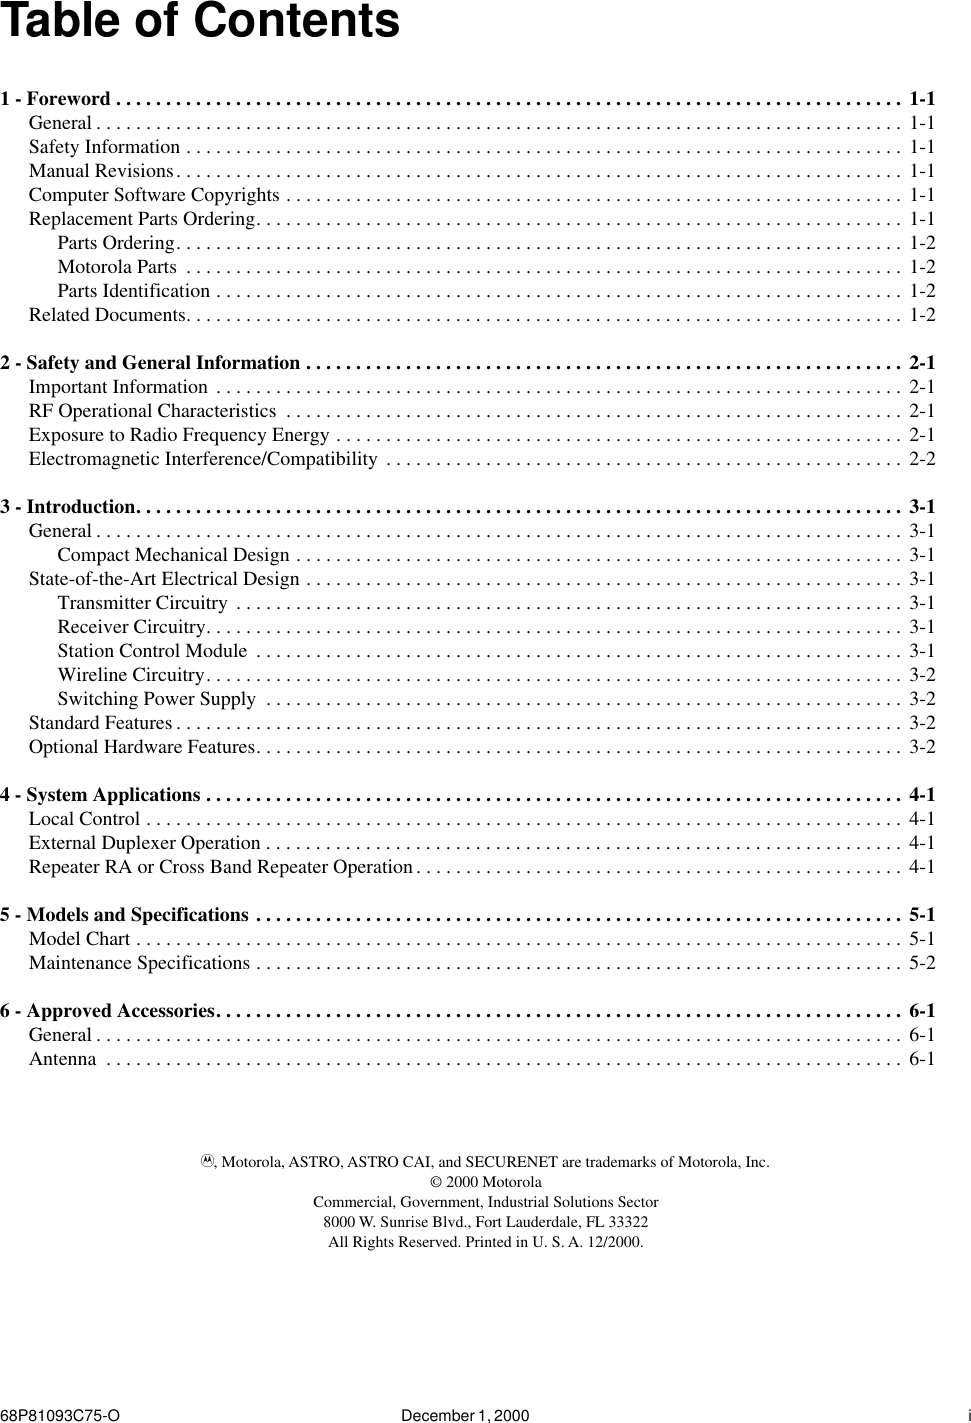  68P81093C75-O December 1, 2000  i Table of Contents 1 - Foreword . . . . . . . . . . . . . . . . . . . . . . . . . . . . . . . . . . . . . . . . . . . . . . . . . . . . . . . . . . . . . . . . . . . . . . . . . . . . . . .  1-1 General . . . . . . . . . . . . . . . . . . . . . . . . . . . . . . . . . . . . . . . . . . . . . . . . . . . . . . . . . . . . . . . . . . . . . . . . . . . . . . . . .  1-1Safety Information . . . . . . . . . . . . . . . . . . . . . . . . . . . . . . . . . . . . . . . . . . . . . . . . . . . . . . . . . . . . . . . . . . . . . . . .  1-1Manual Revisions. . . . . . . . . . . . . . . . . . . . . . . . . . . . . . . . . . . . . . . . . . . . . . . . . . . . . . . . . . . . . . . . . . . . . . . . .  1-1Computer Software Copyrights . . . . . . . . . . . . . . . . . . . . . . . . . . . . . . . . . . . . . . . . . . . . . . . . . . . . . . . . . . . . . .  1-1Replacement Parts Ordering. . . . . . . . . . . . . . . . . . . . . . . . . . . . . . . . . . . . . . . . . . . . . . . . . . . . . . . . . . . . . . . . .  1-1Parts Ordering. . . . . . . . . . . . . . . . . . . . . . . . . . . . . . . . . . . . . . . . . . . . . . . . . . . . . . . . . . . . . . . . . . . . . . . . .  1-2Motorola Parts  . . . . . . . . . . . . . . . . . . . . . . . . . . . . . . . . . . . . . . . . . . . . . . . . . . . . . . . . . . . . . . . . . . . . . . . .  1-2Parts Identification . . . . . . . . . . . . . . . . . . . . . . . . . . . . . . . . . . . . . . . . . . . . . . . . . . . . . . . . . . . . . . . . . . . . .  1-2Related Documents. . . . . . . . . . . . . . . . . . . . . . . . . . . . . . . . . . . . . . . . . . . . . . . . . . . . . . . . . . . . . . . . . . . . . . . .  1-2 2 - Safety and General Information . . . . . . . . . . . . . . . . . . . . . . . . . . . . . . . . . . . . . . . . . . . . . . . . . . . . . . . . . . . .  2-1 Important Information . . . . . . . . . . . . . . . . . . . . . . . . . . . . . . . . . . . . . . . . . . . . . . . . . . . . . . . . . . . . . . . . . . . . . 2-1RF Operational Characteristics  . . . . . . . . . . . . . . . . . . . . . . . . . . . . . . . . . . . . . . . . . . . . . . . . . . . . . . . . . . . . . . 2-1Exposure to Radio Frequency Energy . . . . . . . . . . . . . . . . . . . . . . . . . . . . . . . . . . . . . . . . . . . . . . . . . . . . . . . . .  2-1Electromagnetic Interference/Compatibility . . . . . . . . . . . . . . . . . . . . . . . . . . . . . . . . . . . . . . . . . . . . . . . . . . . . 2-2 3 - Introduction. . . . . . . . . . . . . . . . . . . . . . . . . . . . . . . . . . . . . . . . . . . . . . . . . . . . . . . . . . . . . . . . . . . . . . . . . . . . .  3-1 General . . . . . . . . . . . . . . . . . . . . . . . . . . . . . . . . . . . . . . . . . . . . . . . . . . . . . . . . . . . . . . . . . . . . . . . . . . . . . . . . .  3-1Compact Mechanical Design . . . . . . . . . . . . . . . . . . . . . . . . . . . . . . . . . . . . . . . . . . . . . . . . . . . . . . . . . . . . .  3-1State-of-the-Art Electrical Design . . . . . . . . . . . . . . . . . . . . . . . . . . . . . . . . . . . . . . . . . . . . . . . . . . . . . . . . . . . .  3-1Transmitter Circuitry . . . . . . . . . . . . . . . . . . . . . . . . . . . . . . . . . . . . . . . . . . . . . . . . . . . . . . . . . . . . . . . . . . . 3-1Receiver Circuitry. . . . . . . . . . . . . . . . . . . . . . . . . . . . . . . . . . . . . . . . . . . . . . . . . . . . . . . . . . . . . . . . . . . . . .  3-1Station Control Module  . . . . . . . . . . . . . . . . . . . . . . . . . . . . . . . . . . . . . . . . . . . . . . . . . . . . . . . . . . . . . . . . .  3-1Wireline Circuitry. . . . . . . . . . . . . . . . . . . . . . . . . . . . . . . . . . . . . . . . . . . . . . . . . . . . . . . . . . . . . . . . . . . . . .  3-2Switching Power Supply  . . . . . . . . . . . . . . . . . . . . . . . . . . . . . . . . . . . . . . . . . . . . . . . . . . . . . . . . . . . . . . . . 3-2Standard Features . . . . . . . . . . . . . . . . . . . . . . . . . . . . . . . . . . . . . . . . . . . . . . . . . . . . . . . . . . . . . . . . . . . . . . . . .  3-2Optional Hardware Features. . . . . . . . . . . . . . . . . . . . . . . . . . . . . . . . . . . . . . . . . . . . . . . . . . . . . . . . . . . . . . . . .  3-2 4 - System Applications . . . . . . . . . . . . . . . . . . . . . . . . . . . . . . . . . . . . . . . . . . . . . . . . . . . . . . . . . . . . . . . . . . . . . .  4-1 Local Control . . . . . . . . . . . . . . . . . . . . . . . . . . . . . . . . . . . . . . . . . . . . . . . . . . . . . . . . . . . . . . . . . . . . . . . . . . . .  4-1External Duplexer Operation . . . . . . . . . . . . . . . . . . . . . . . . . . . . . . . . . . . . . . . . . . . . . . . . . . . . . . . . . . . . . . . .  4-1Repeater RA or Cross Band Repeater Operation. . . . . . . . . . . . . . . . . . . . . . . . . . . . . . . . . . . . . . . . . . . . . . . . . 4-1 5 - Models and Specifications . . . . . . . . . . . . . . . . . . . . . . . . . . . . . . . . . . . . . . . . . . . . . . . . . . . . . . . . . . . . . . . . .  5-1 Model Chart . . . . . . . . . . . . . . . . . . . . . . . . . . . . . . . . . . . . . . . . . . . . . . . . . . . . . . . . . . . . . . . . . . . . . . . . . . . . .  5-1Maintenance Specifications . . . . . . . . . . . . . . . . . . . . . . . . . . . . . . . . . . . . . . . . . . . . . . . . . . . . . . . . . . . . . . . . .  5-2 6 - Approved Accessories. . . . . . . . . . . . . . . . . . . . . . . . . . . . . . . . . . . . . . . . . . . . . . . . . . . . . . . . . . . . . . . . . . . . .  6-1 General . . . . . . . . . . . . . . . . . . . . . . . . . . . . . . . . . . . . . . . . . . . . . . . . . . . . . . . . . . . . . . . . . . . . . . . . . . . . . . . . .  6-1Antenna  . . . . . . . . . . . . . . . . . . . . . . . . . . . . . . . . . . . . . . . . . . . . . . . . . . . . . . . . . . . . . . . . . . . . . . . . . . . . . . . .  6-1 A , Motorola, ASTRO, ASTRO CAI, and SECURENET are trademarks of Motorola, Inc.© 2000 MotorolaCommercial, Government, Industrial Solutions Sector8000 W. Sunrise Blvd., Fort Lauderdale, FL 33322All Rights Reserved. Printed in U. S. A. 12/2000. 